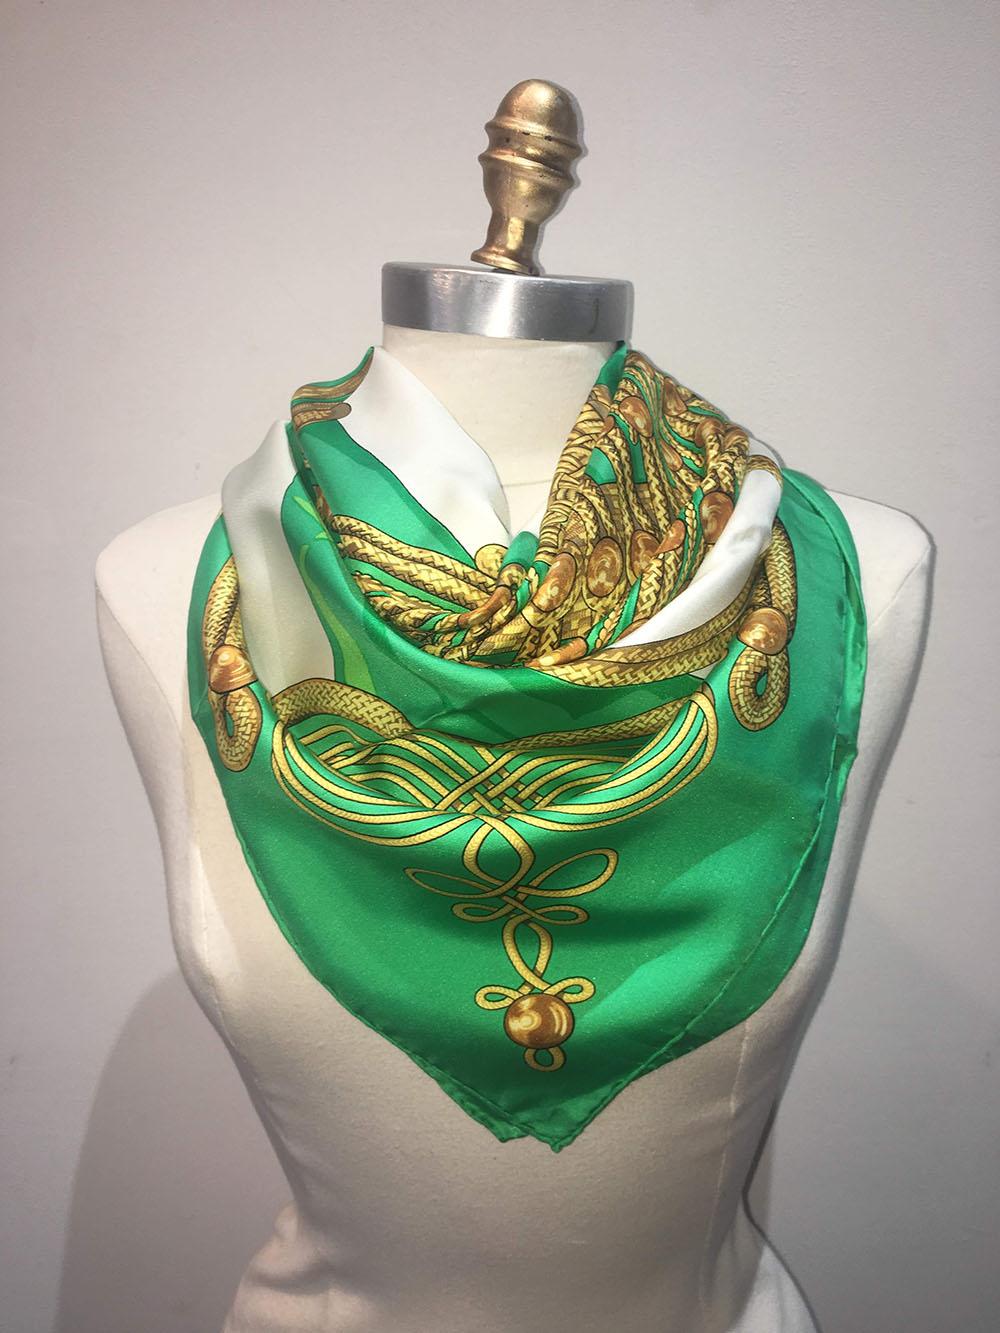 CLASSIC Hermes Vintage Brandebourgs Silk Scarf in Green c1970s in very good condition. Original silk screen design by Caty Latham c1972 features a traditional military jacket in kelly green adorned with golden ropes and buttons. White background